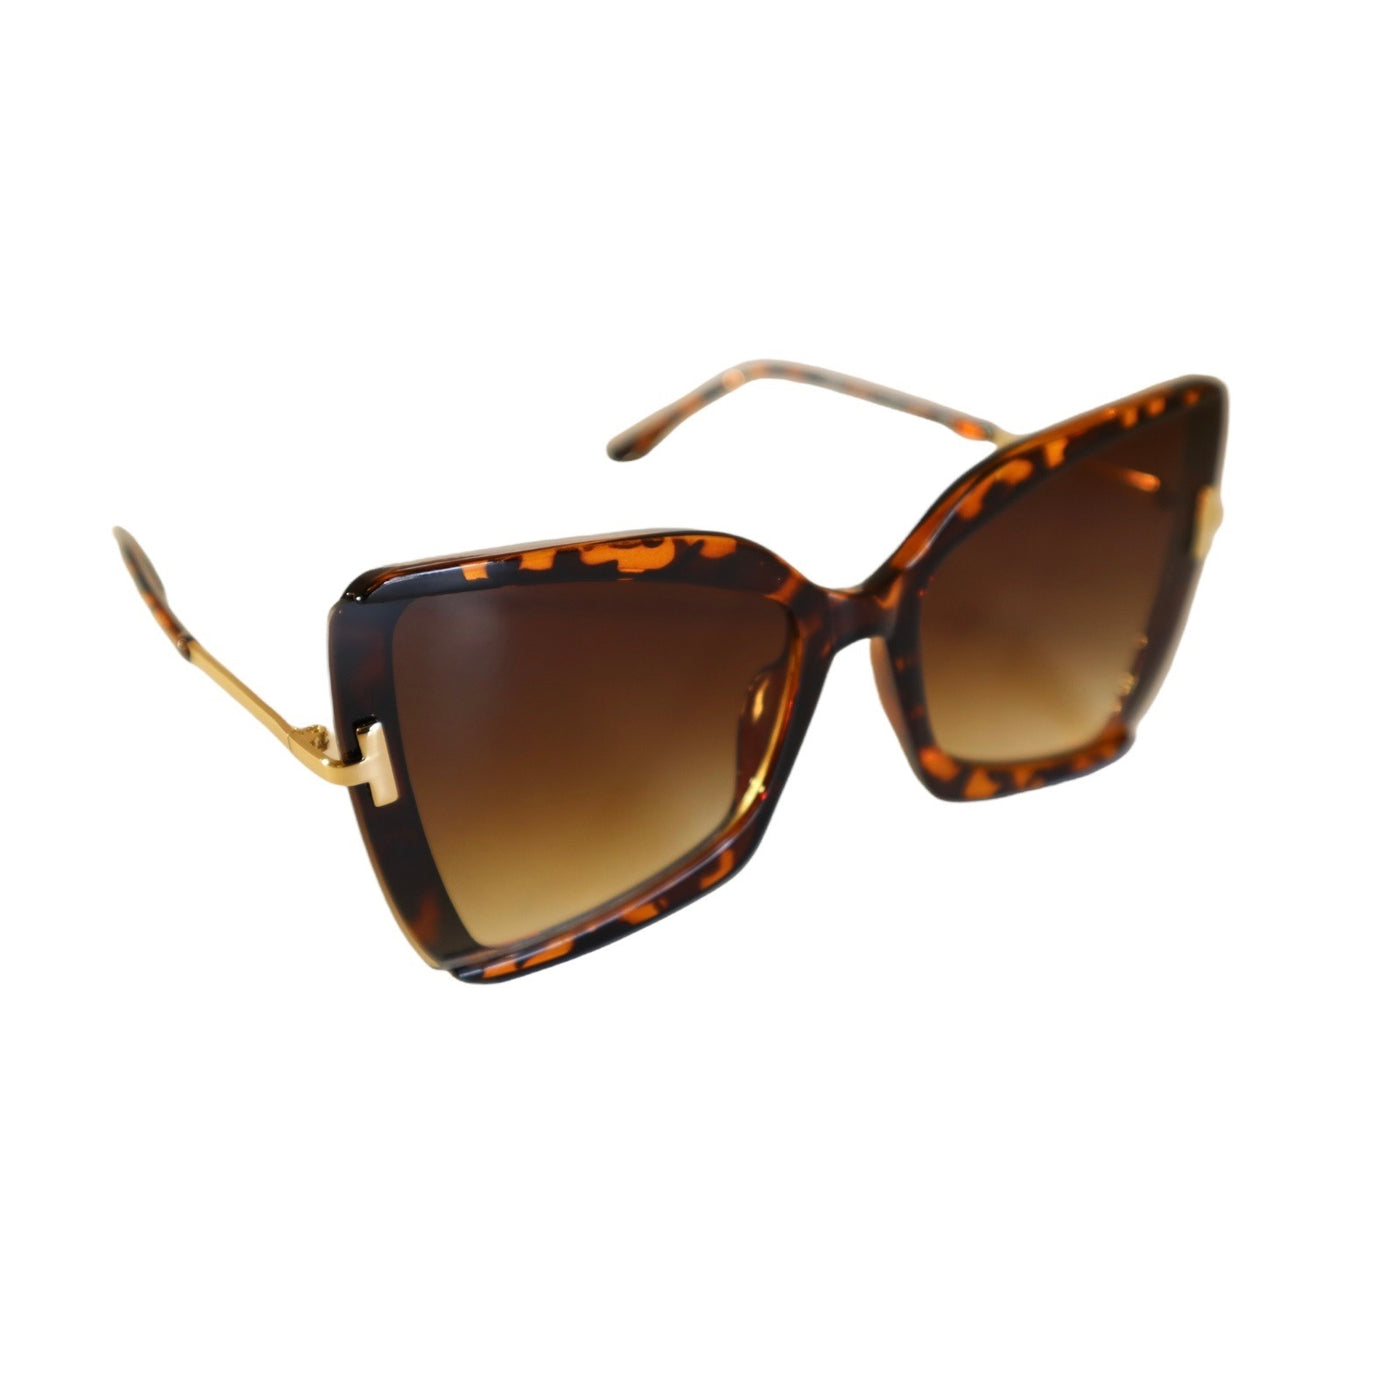 Out-n-About Semi Rimless Cateye Sunglasses Gradient Lens and Animal Print Frame